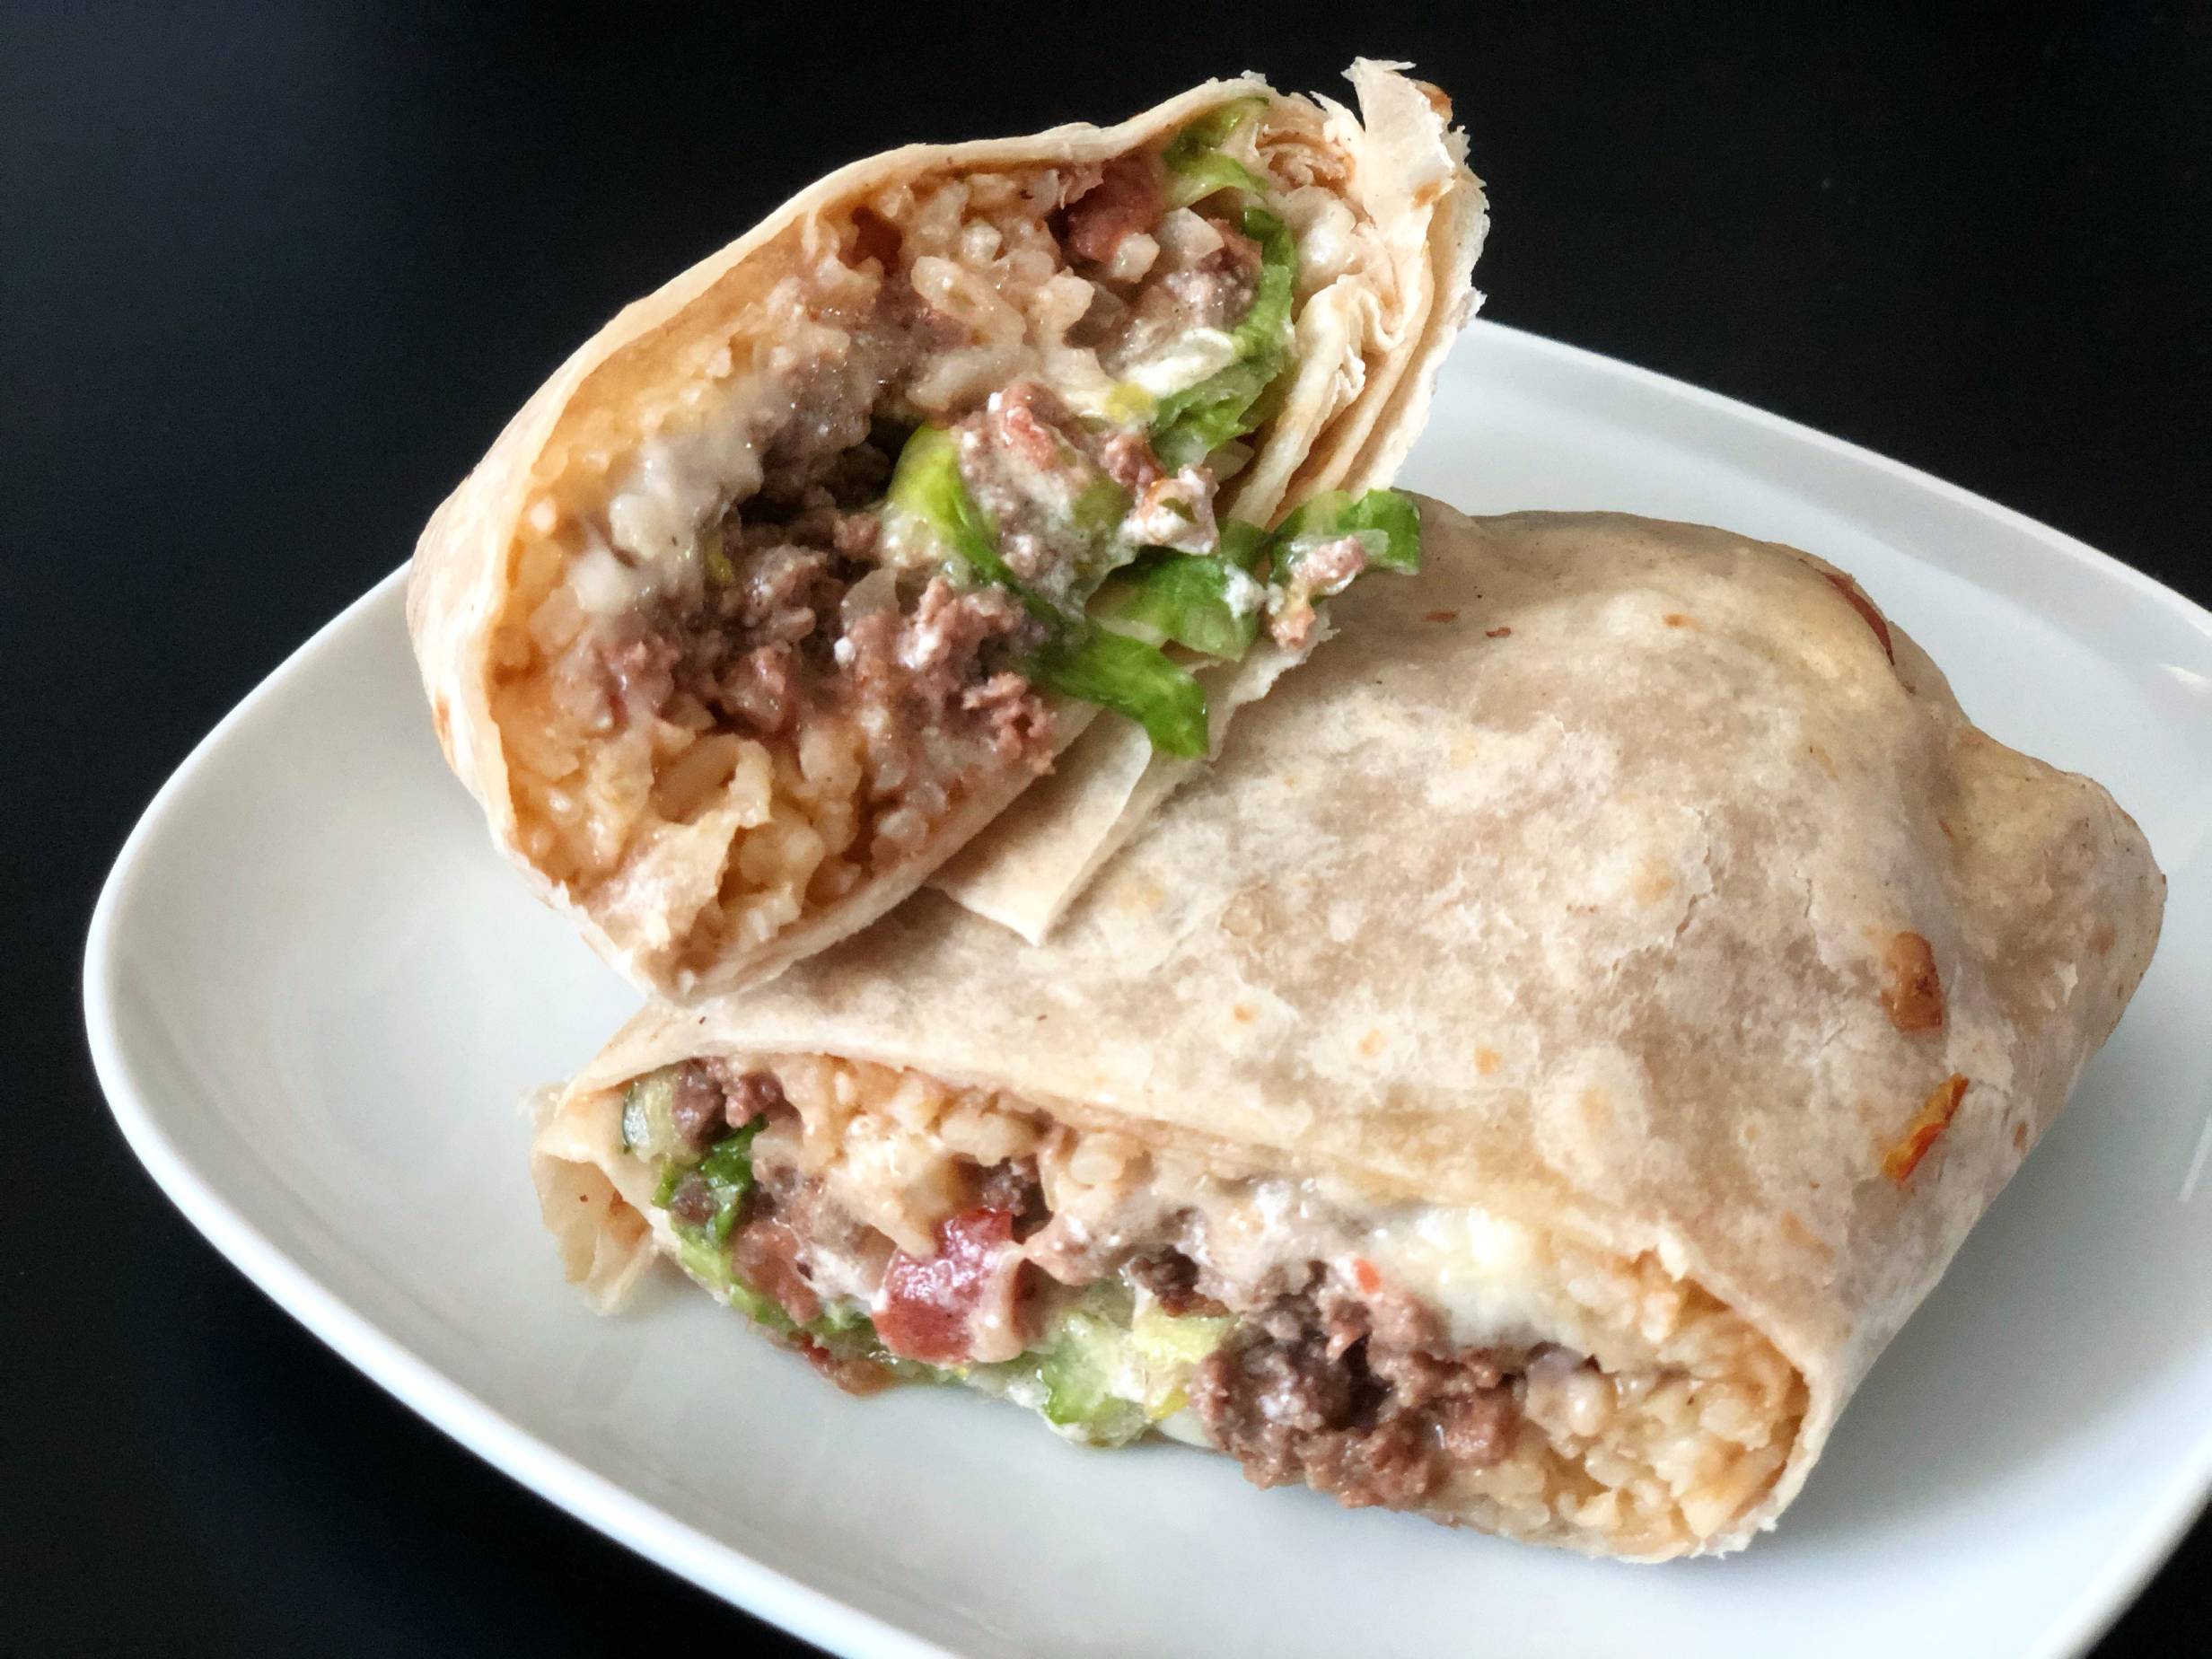 A burrito is sliced in half to reveal the inside of the burrito which is rice, ground beef, cheese, lettuce, onions, and sour cream. Photo by Alyssa Buckley.